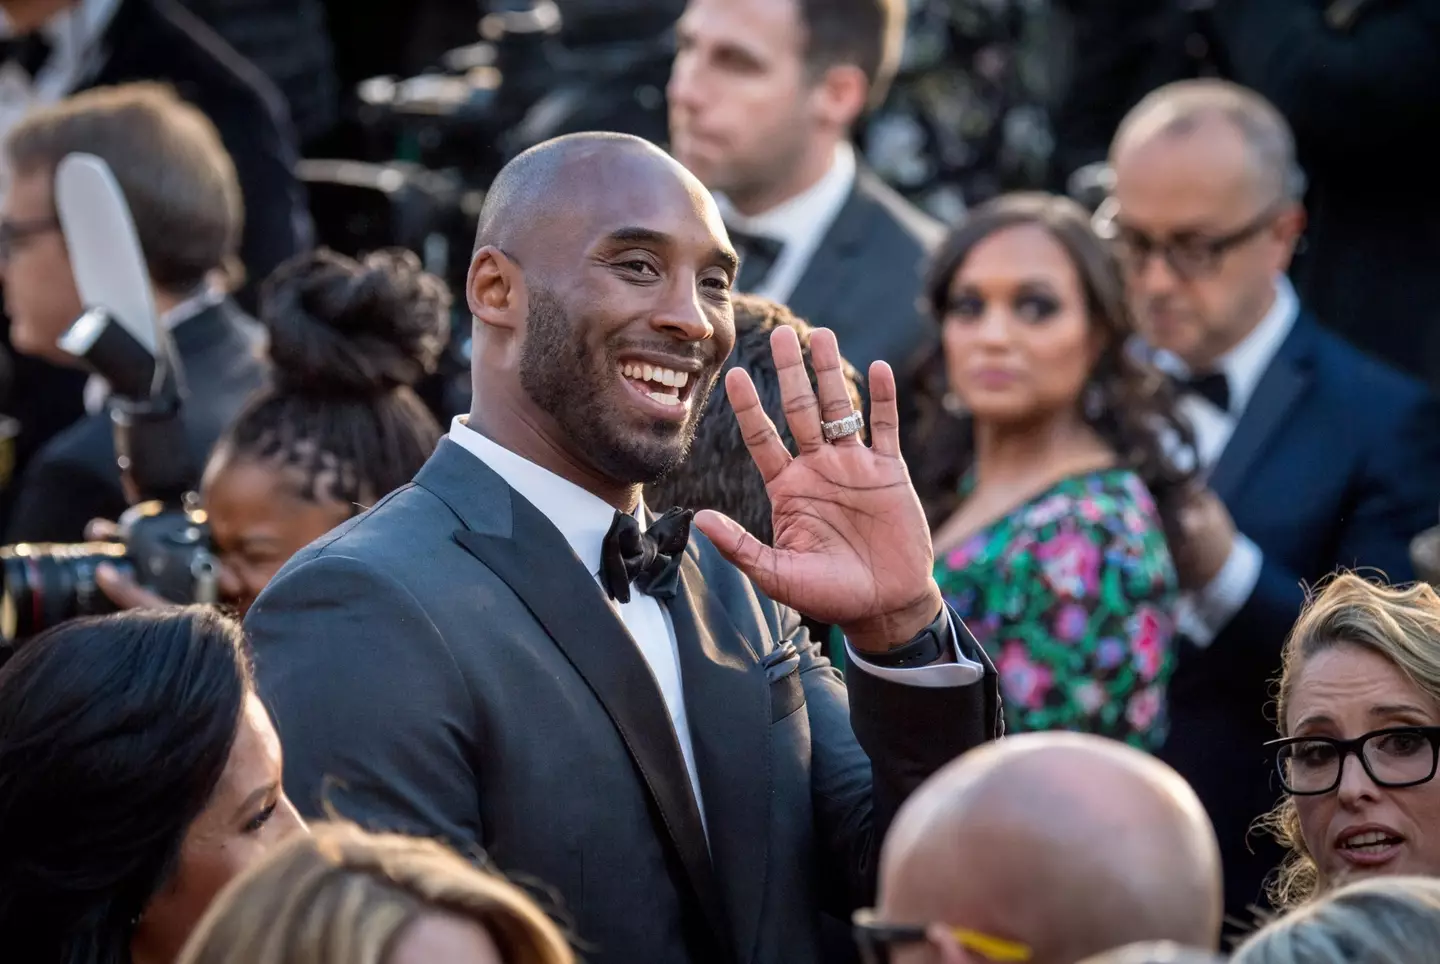 Kobe Bryant was killed in a helicopter crash along with his 13-year-old daughter.